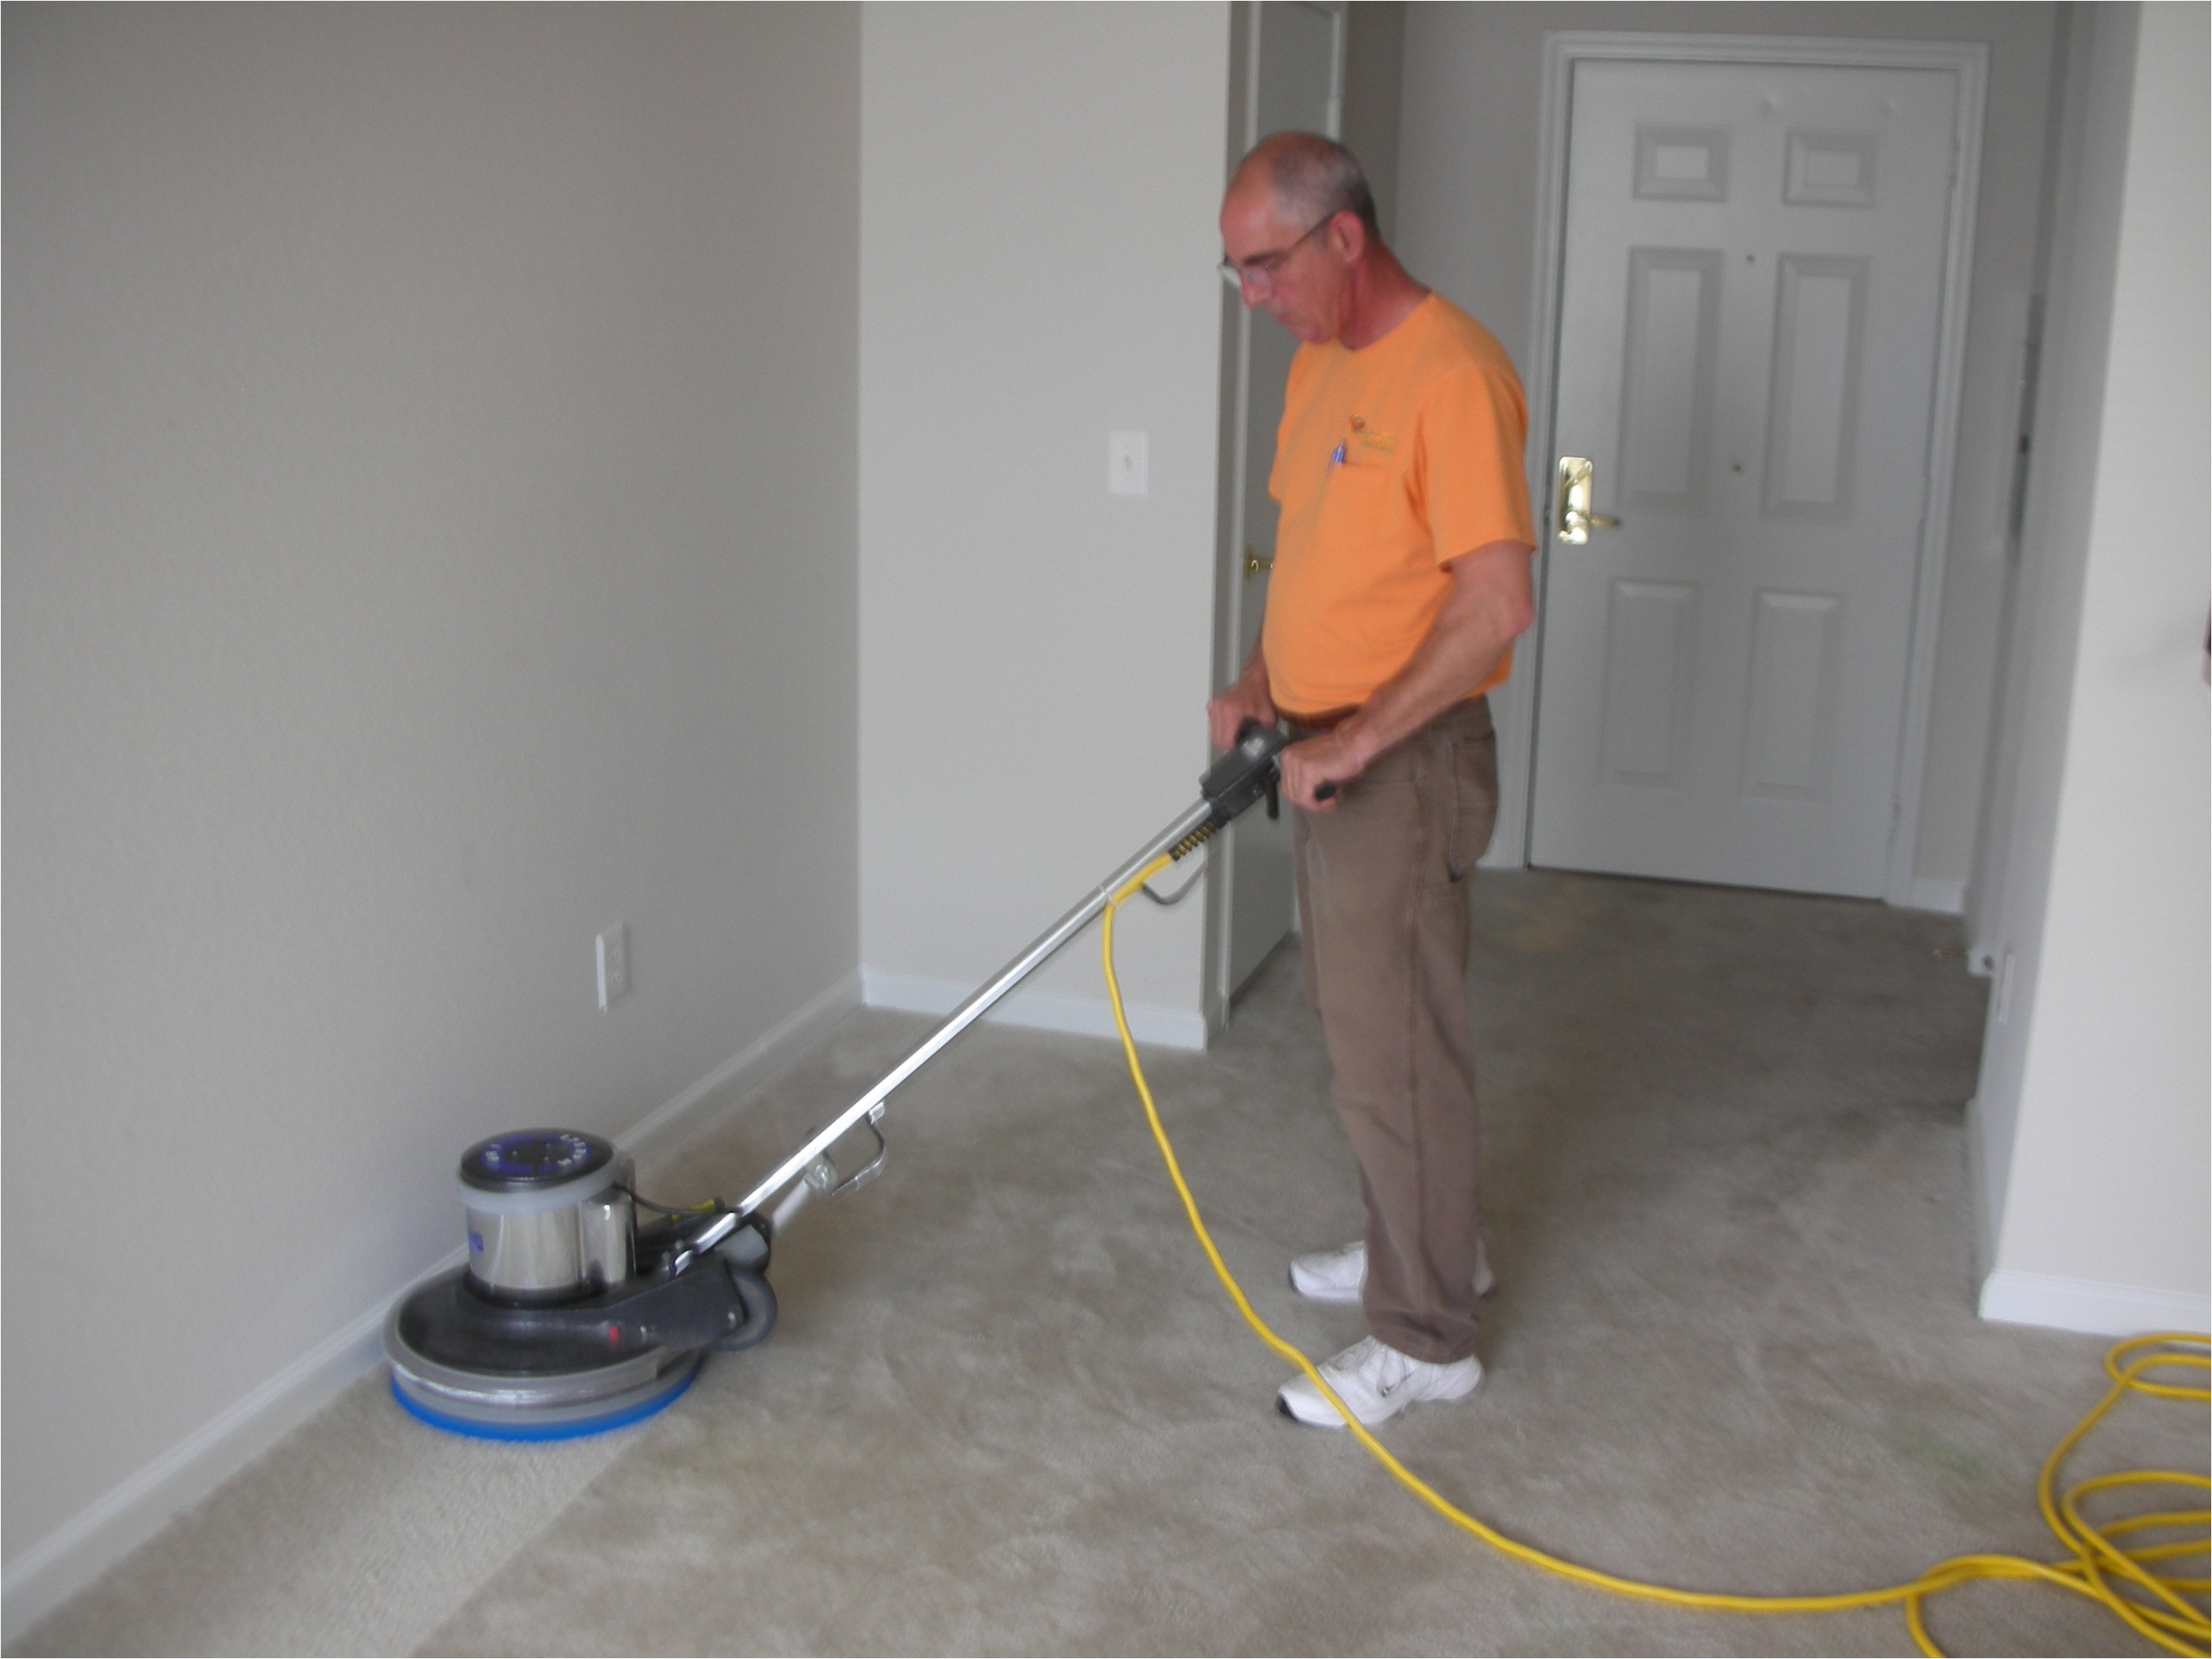 we environmentally friendly carpet cleaning chesterfield from carpet cleaners in midlothian va source citrusolution2 com